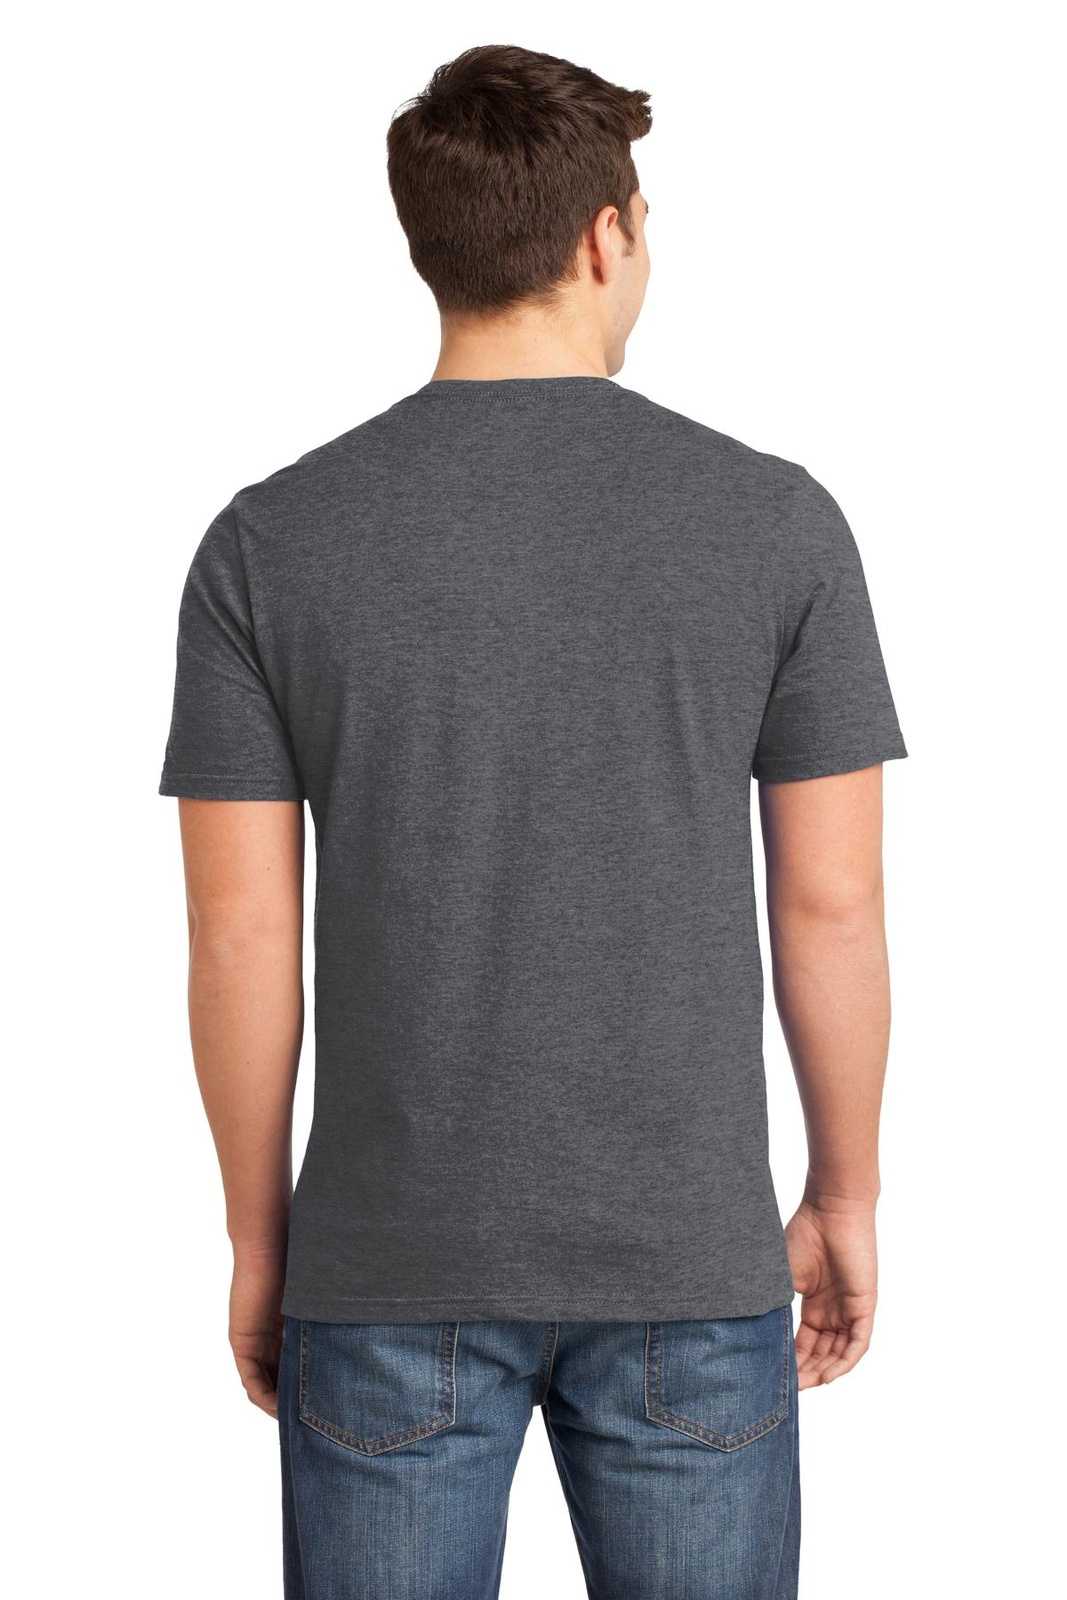 District DT6000 Very Important Tee - Heathered Charcoal - HIT a Double - 1